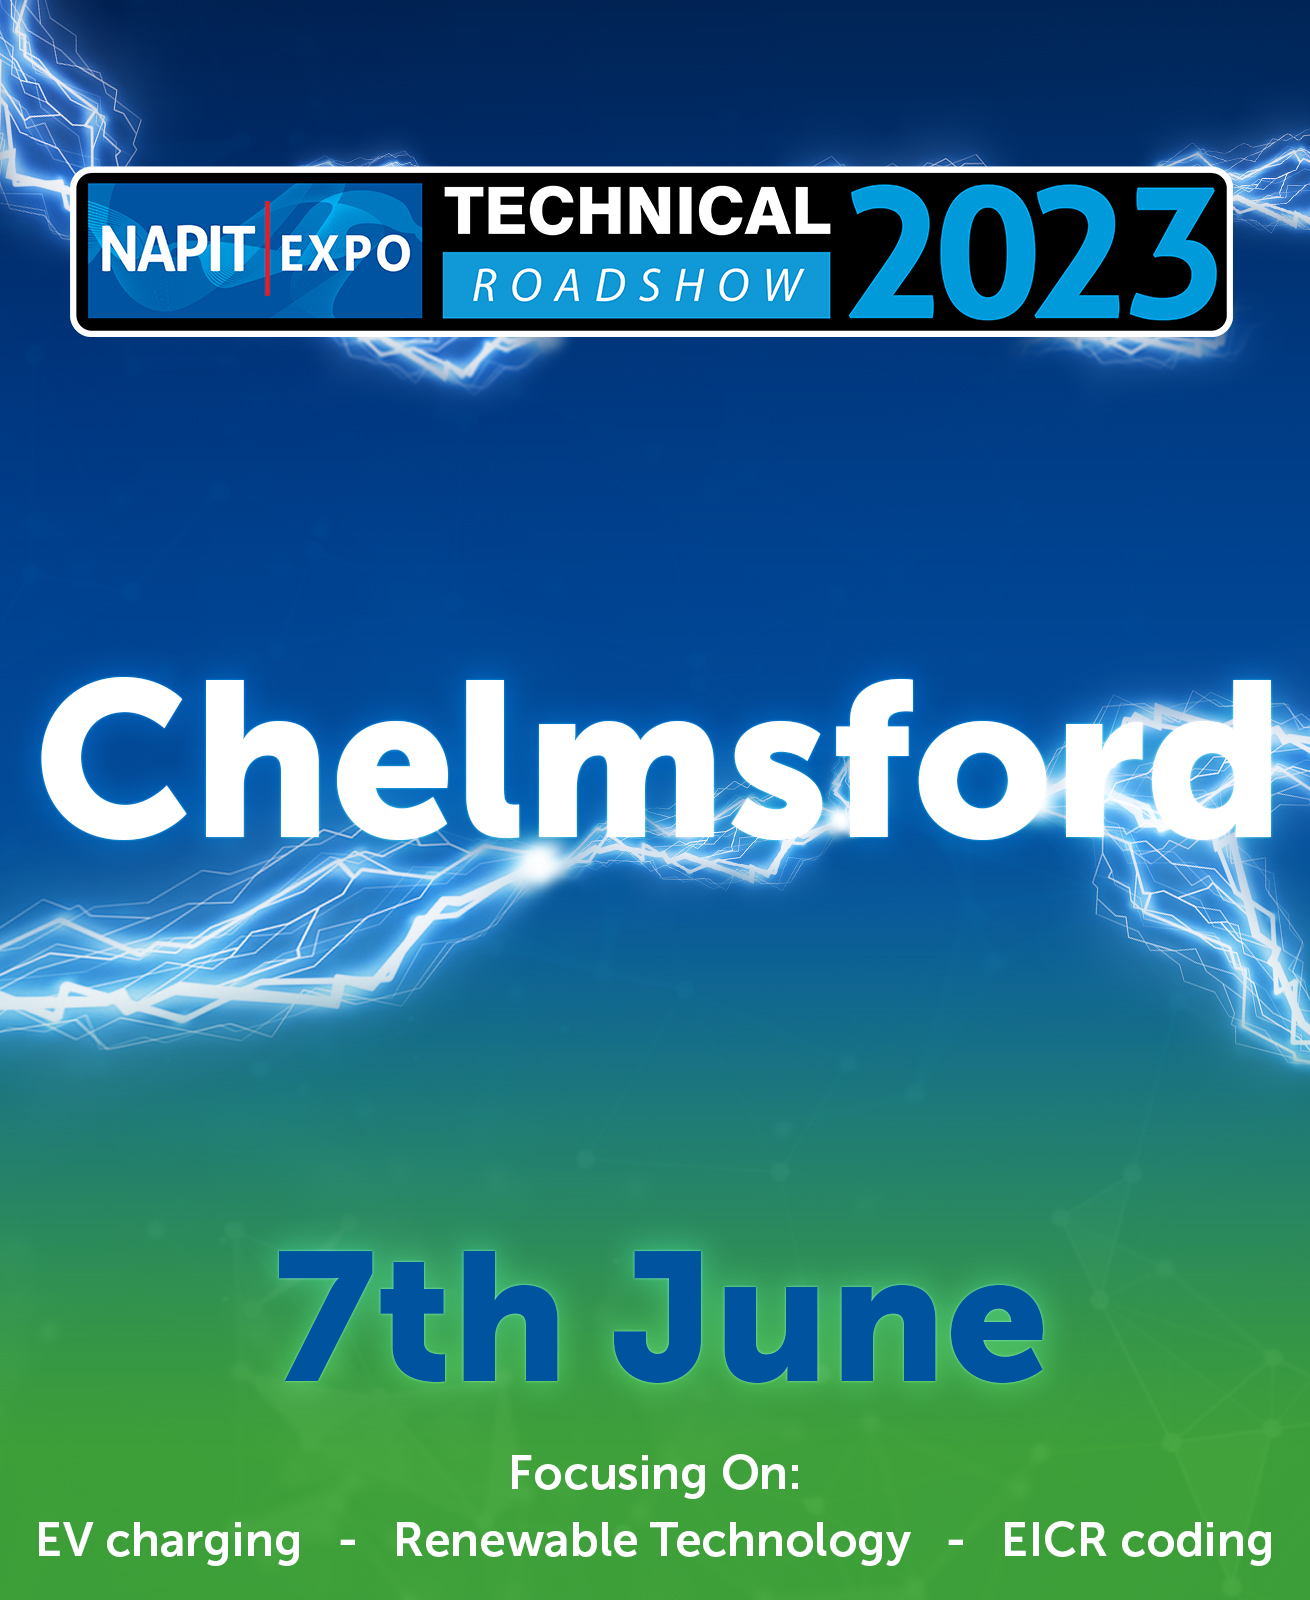 CHELMSFORD NAPIT EXPO 2023 - 7TH JUNE